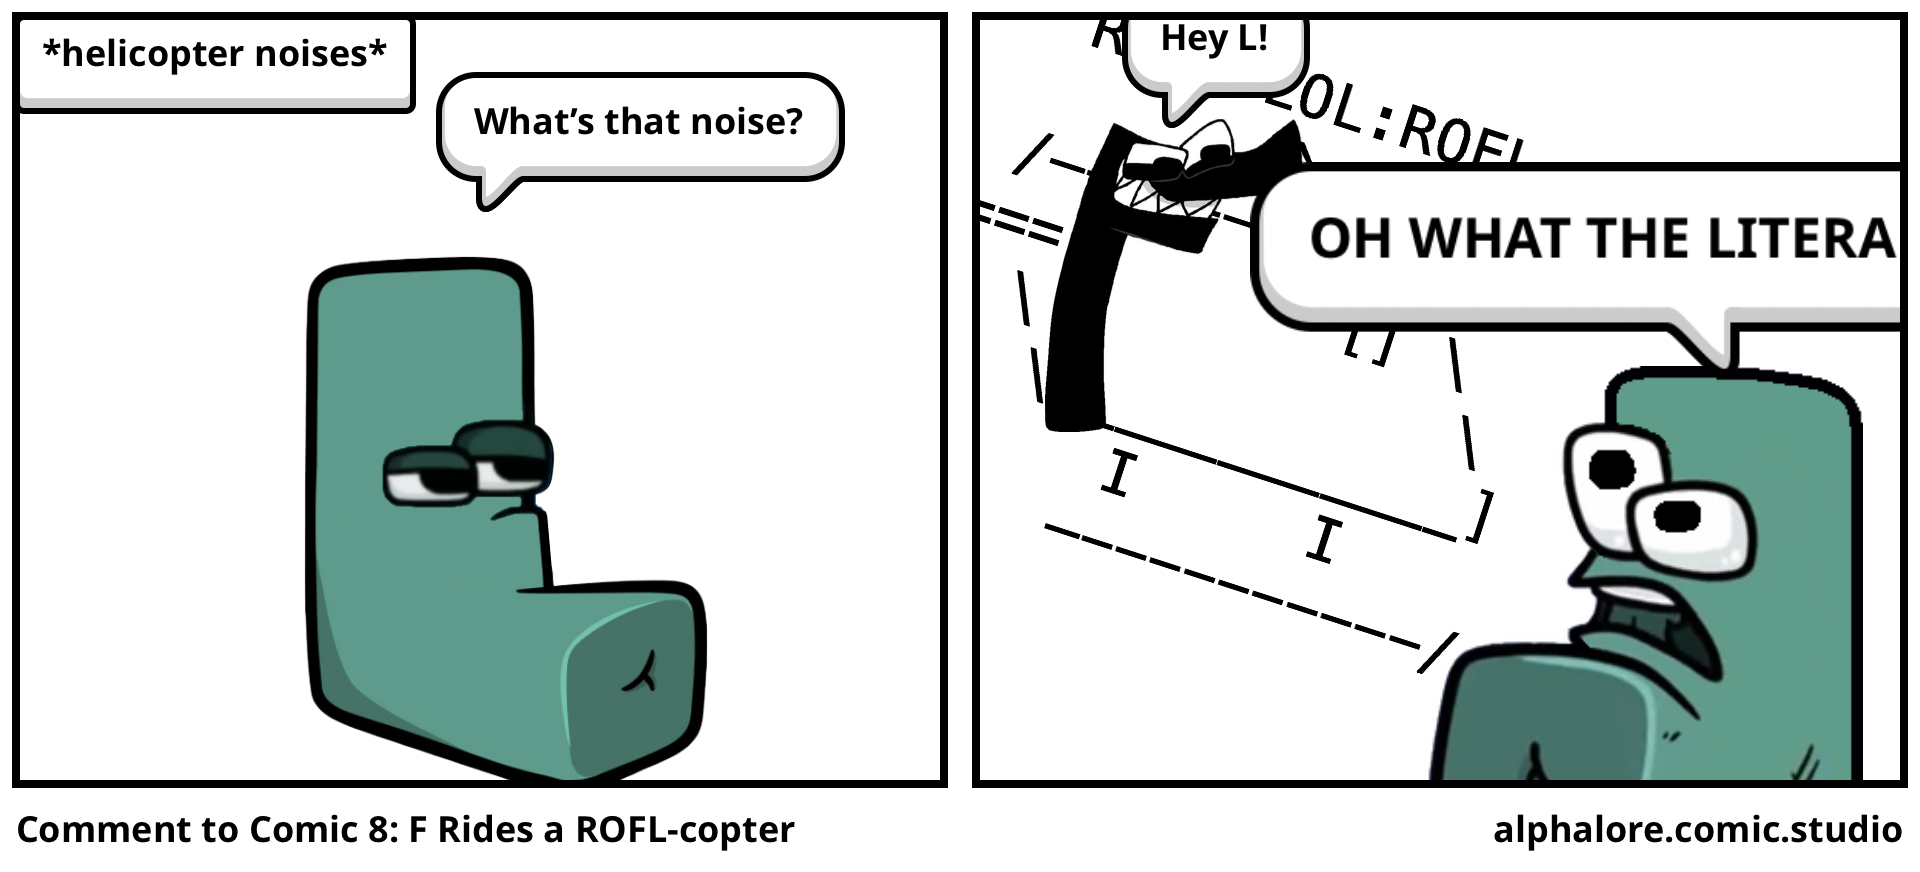 Comment to Comic 8: F Rides a ROFL-copter